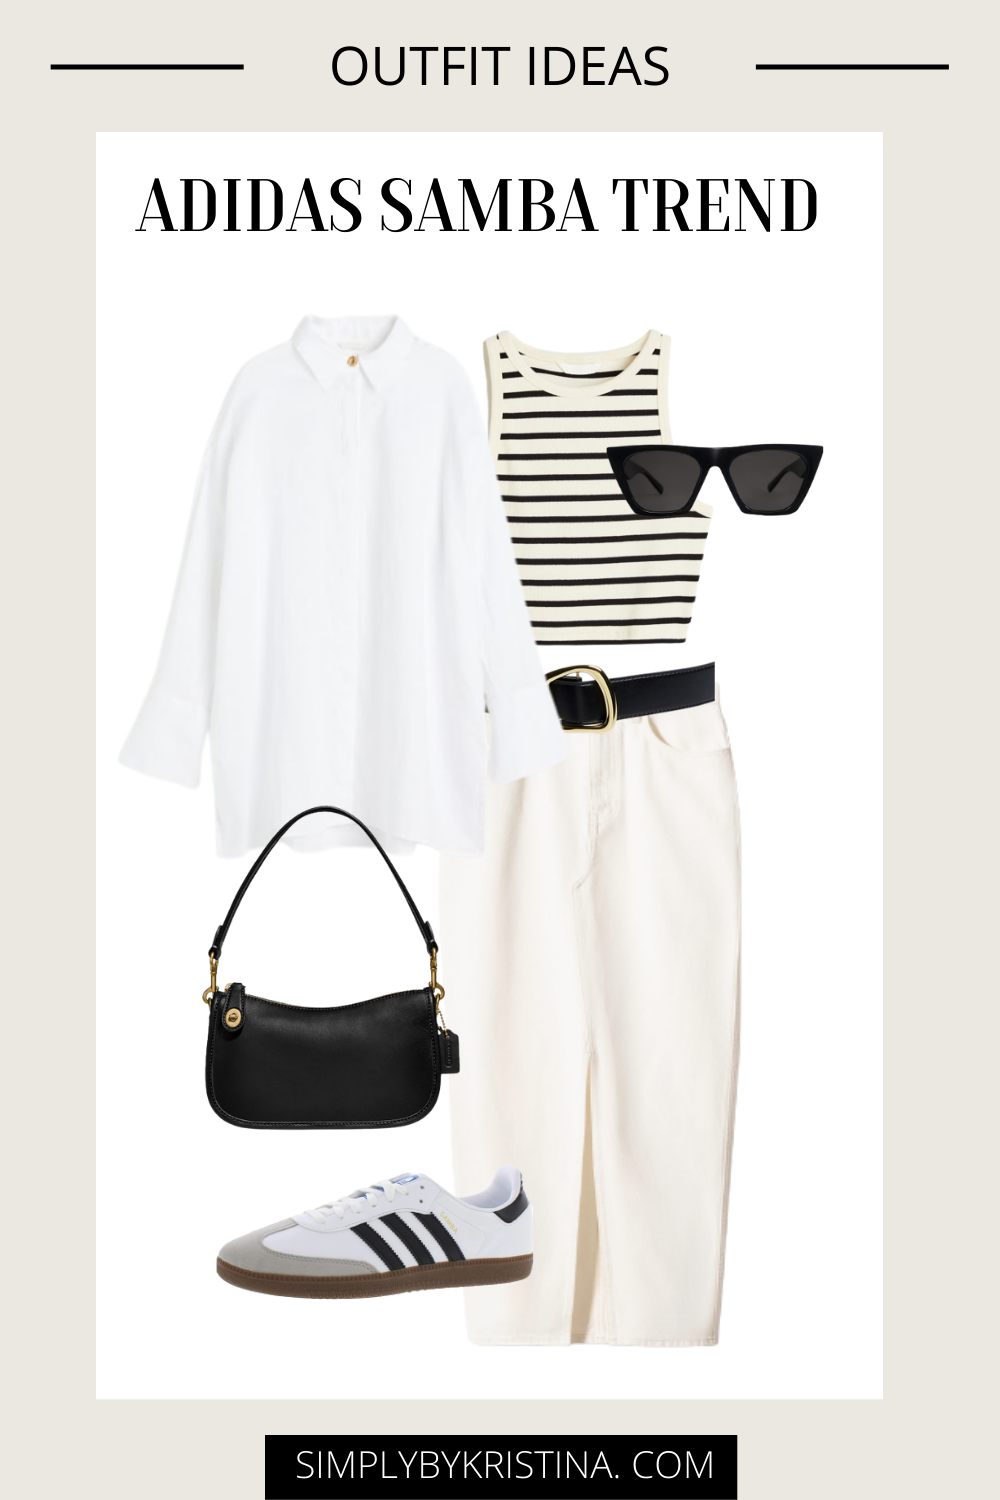 20 Chic Adidas Samba Outfit Ideas For Women